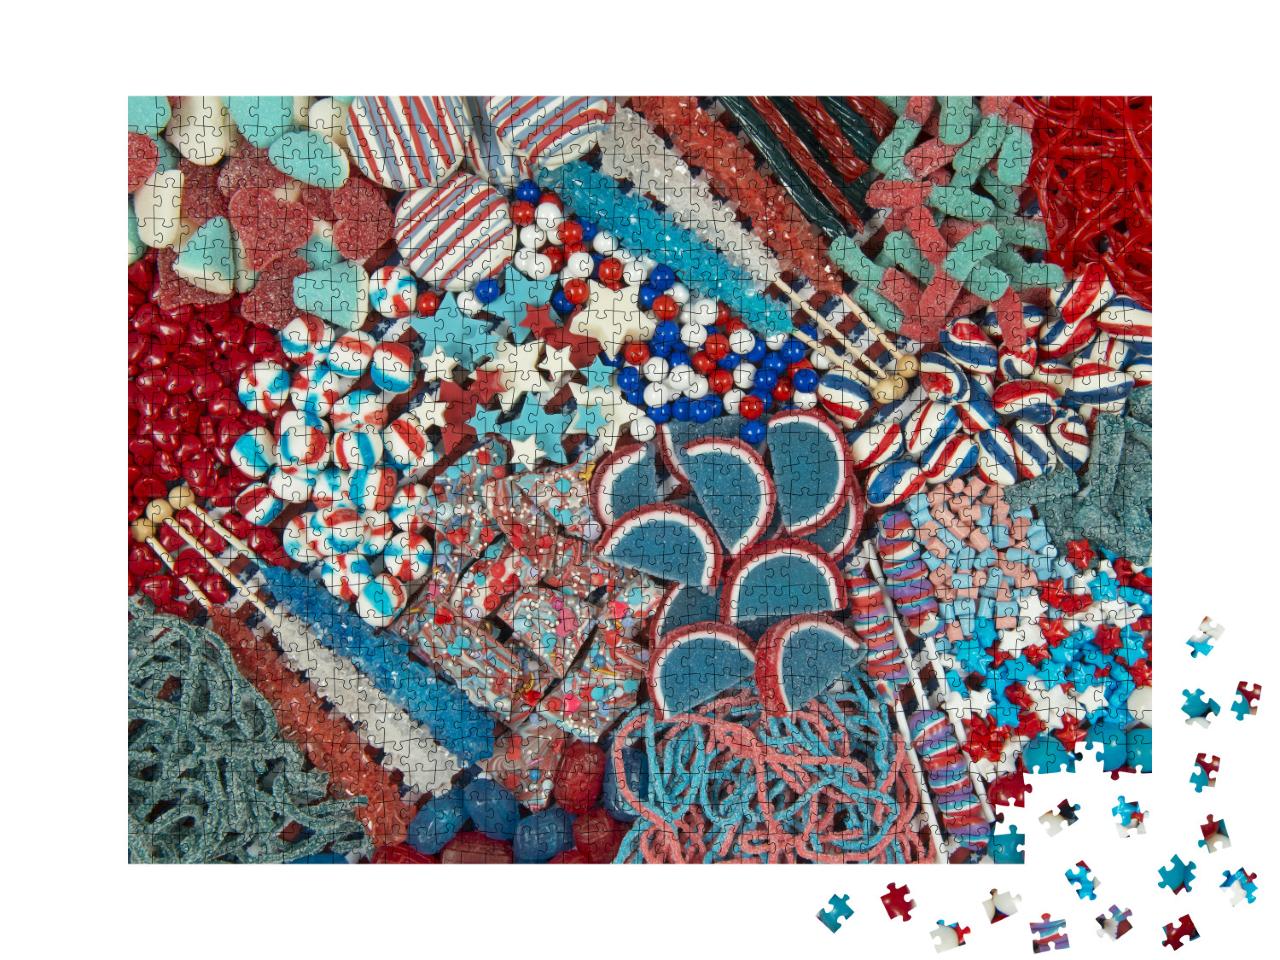 Patriotic Red, White, Blue Candy Photo Collage Jigsaw Puzzle with 1000 pieces